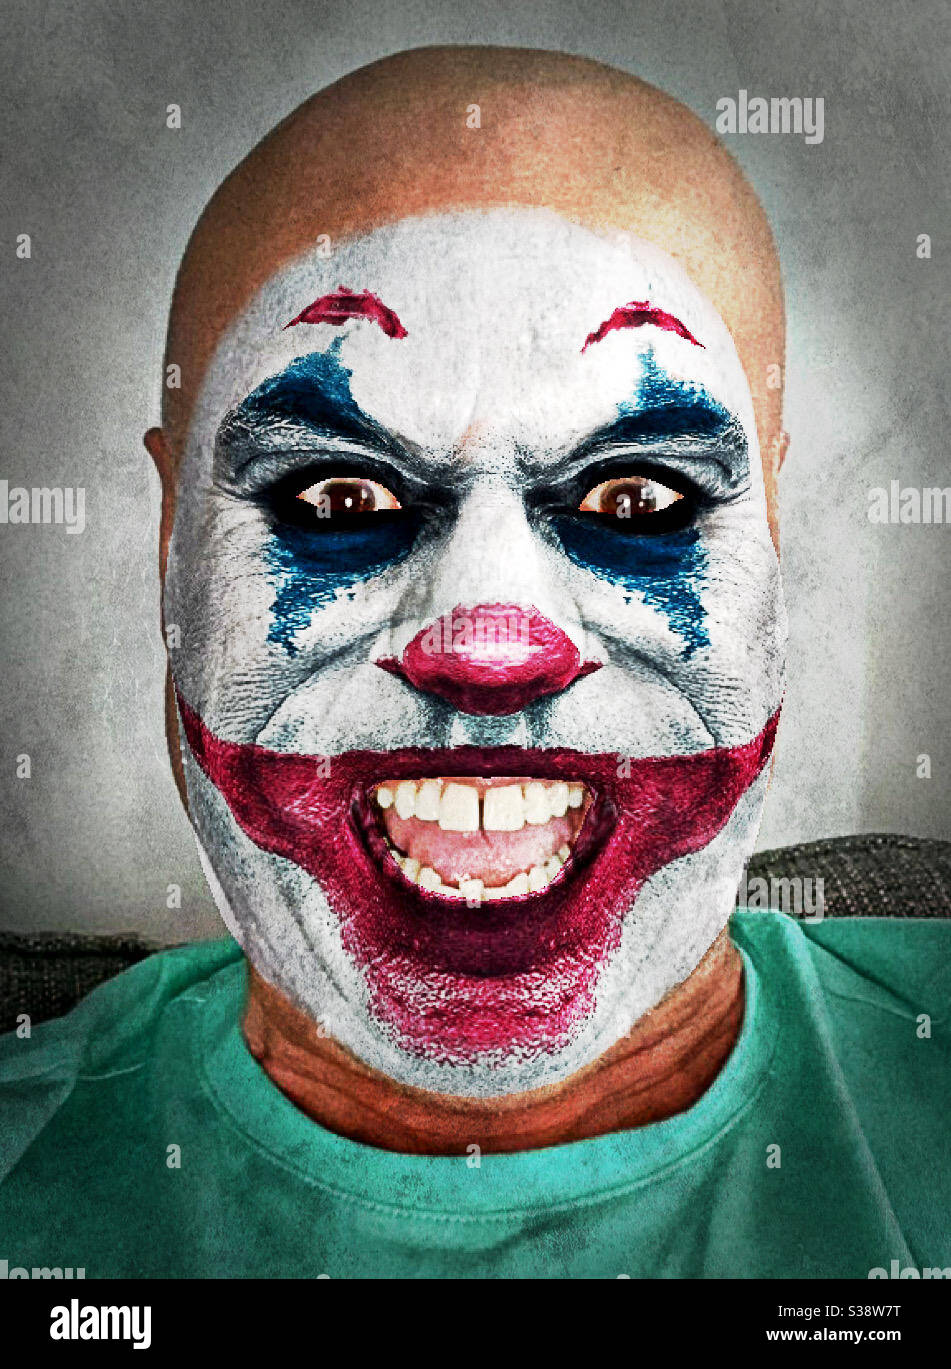 Image of a man modified to look like a sinister clown Stock Photo